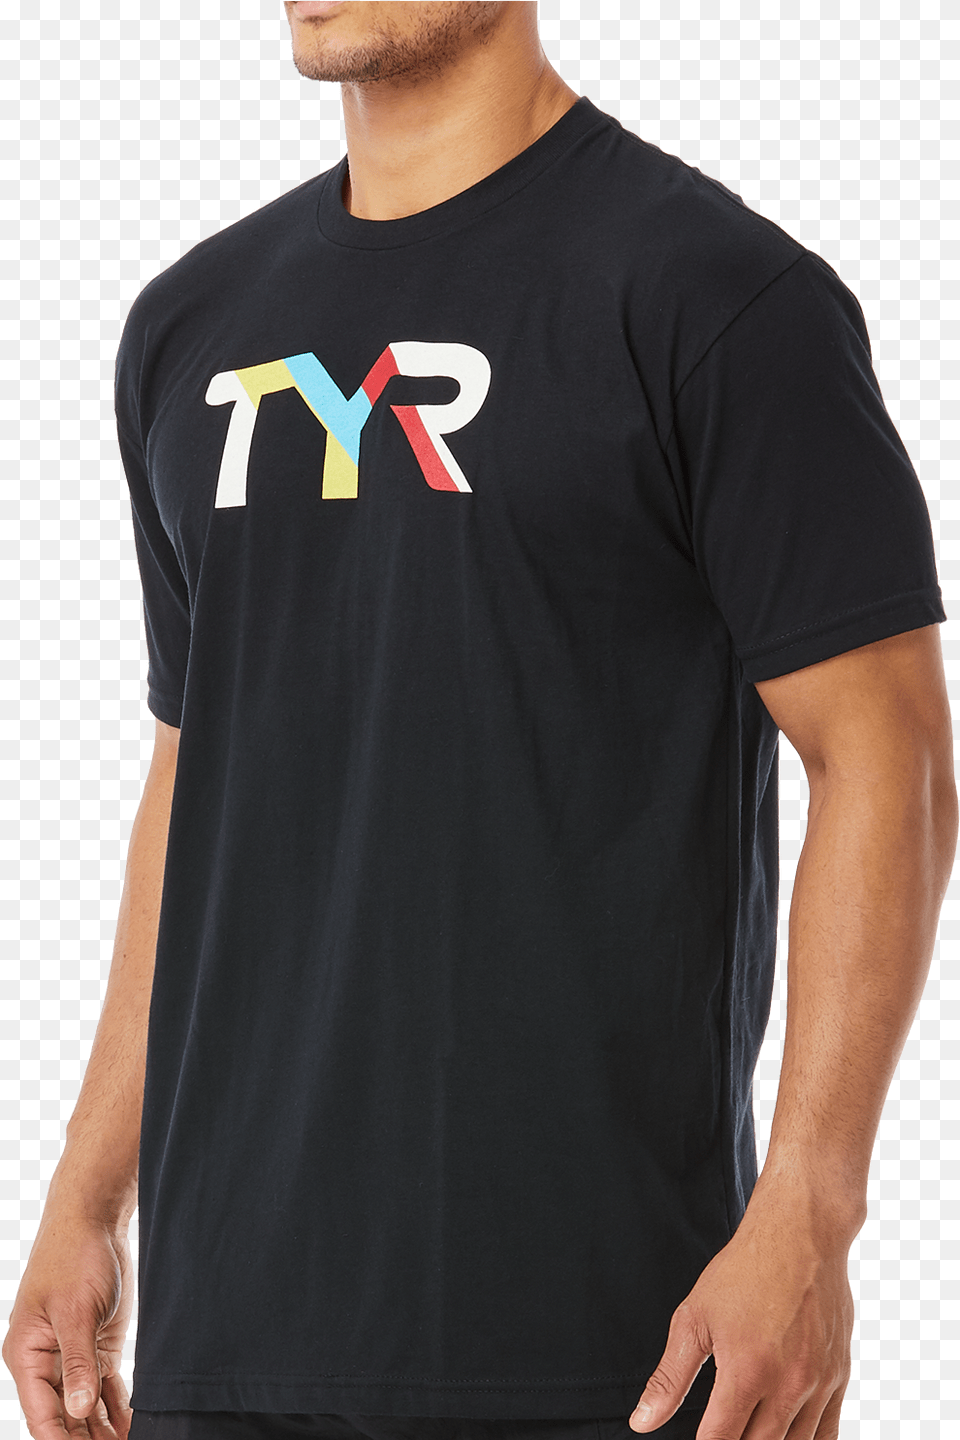 Tyr Men39s 39primary39 Graphic Tee Tyr Men39s Alliance Tech Tee, Clothing, T-shirt, Adult, Male Png